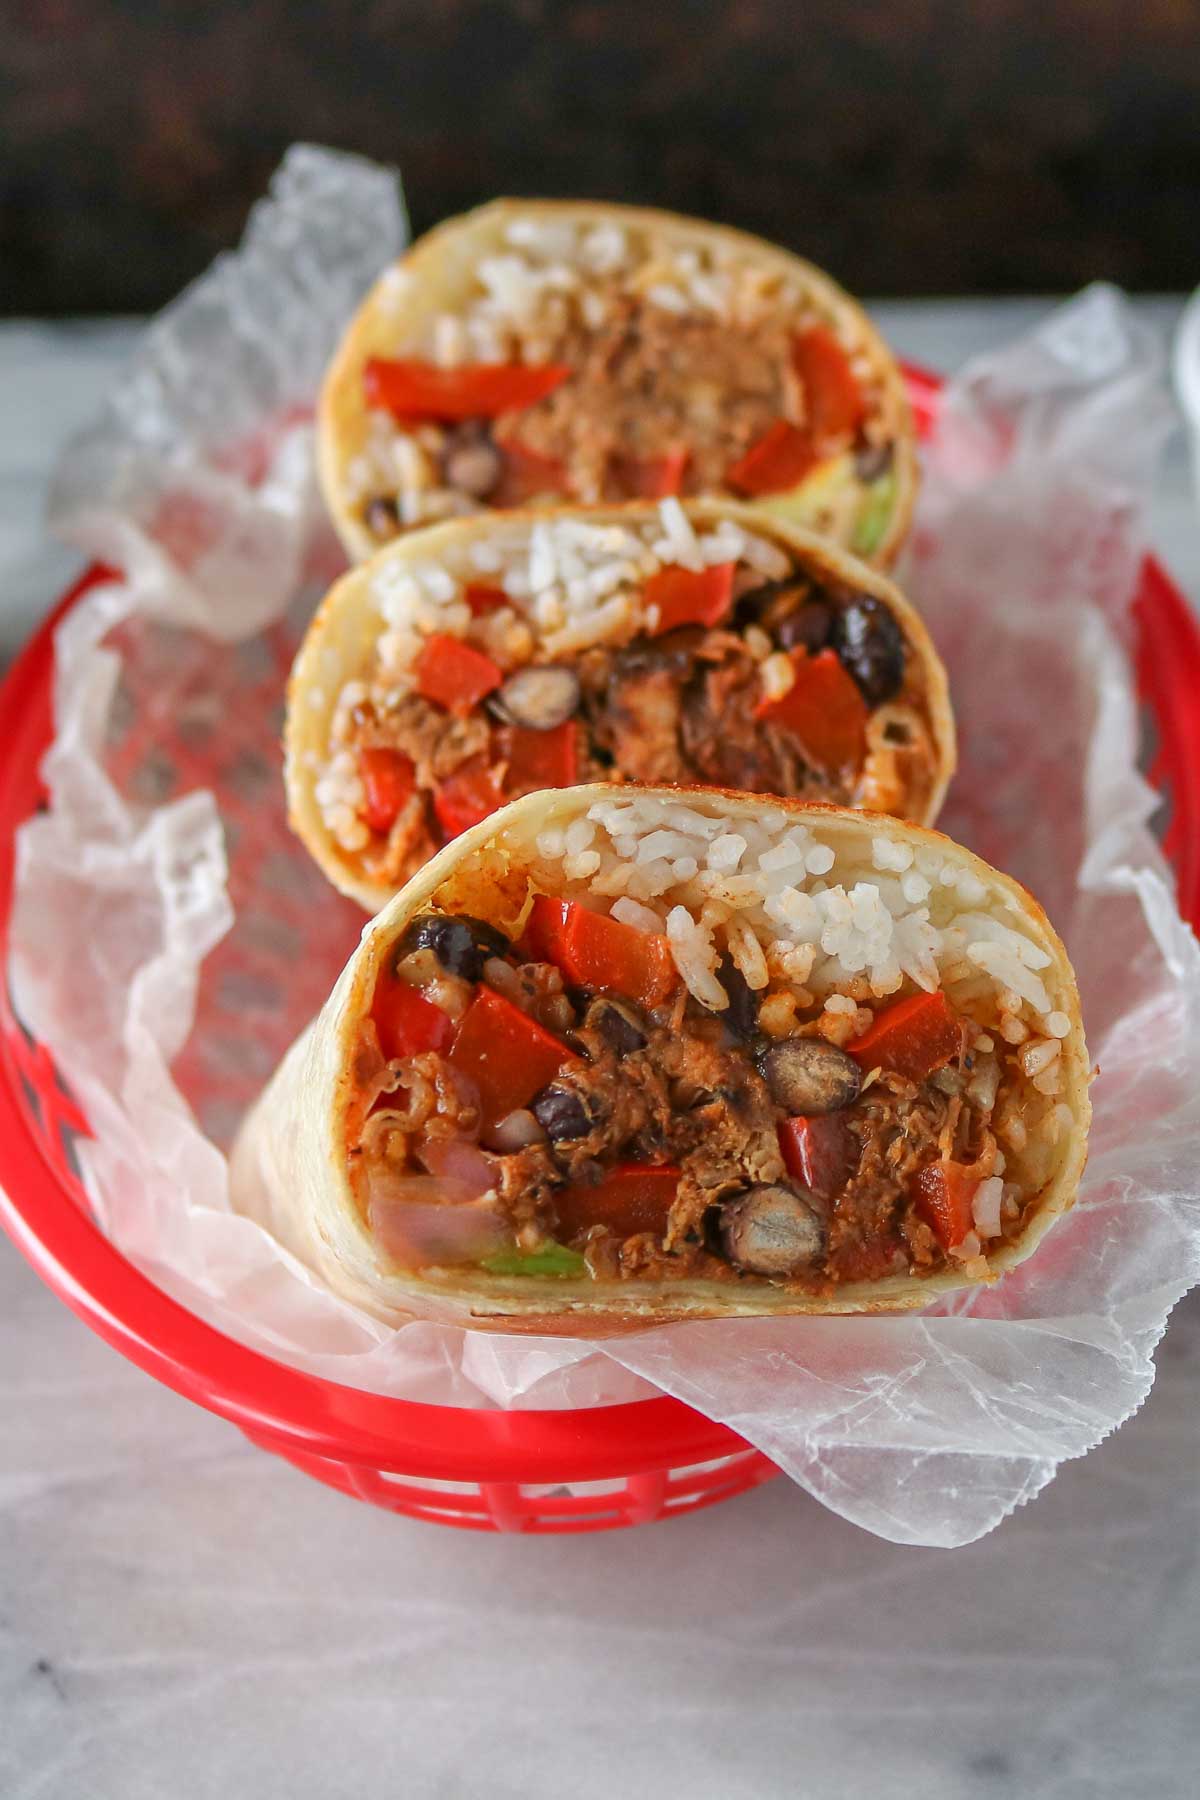 Three pulled pork burritos in a red basket.